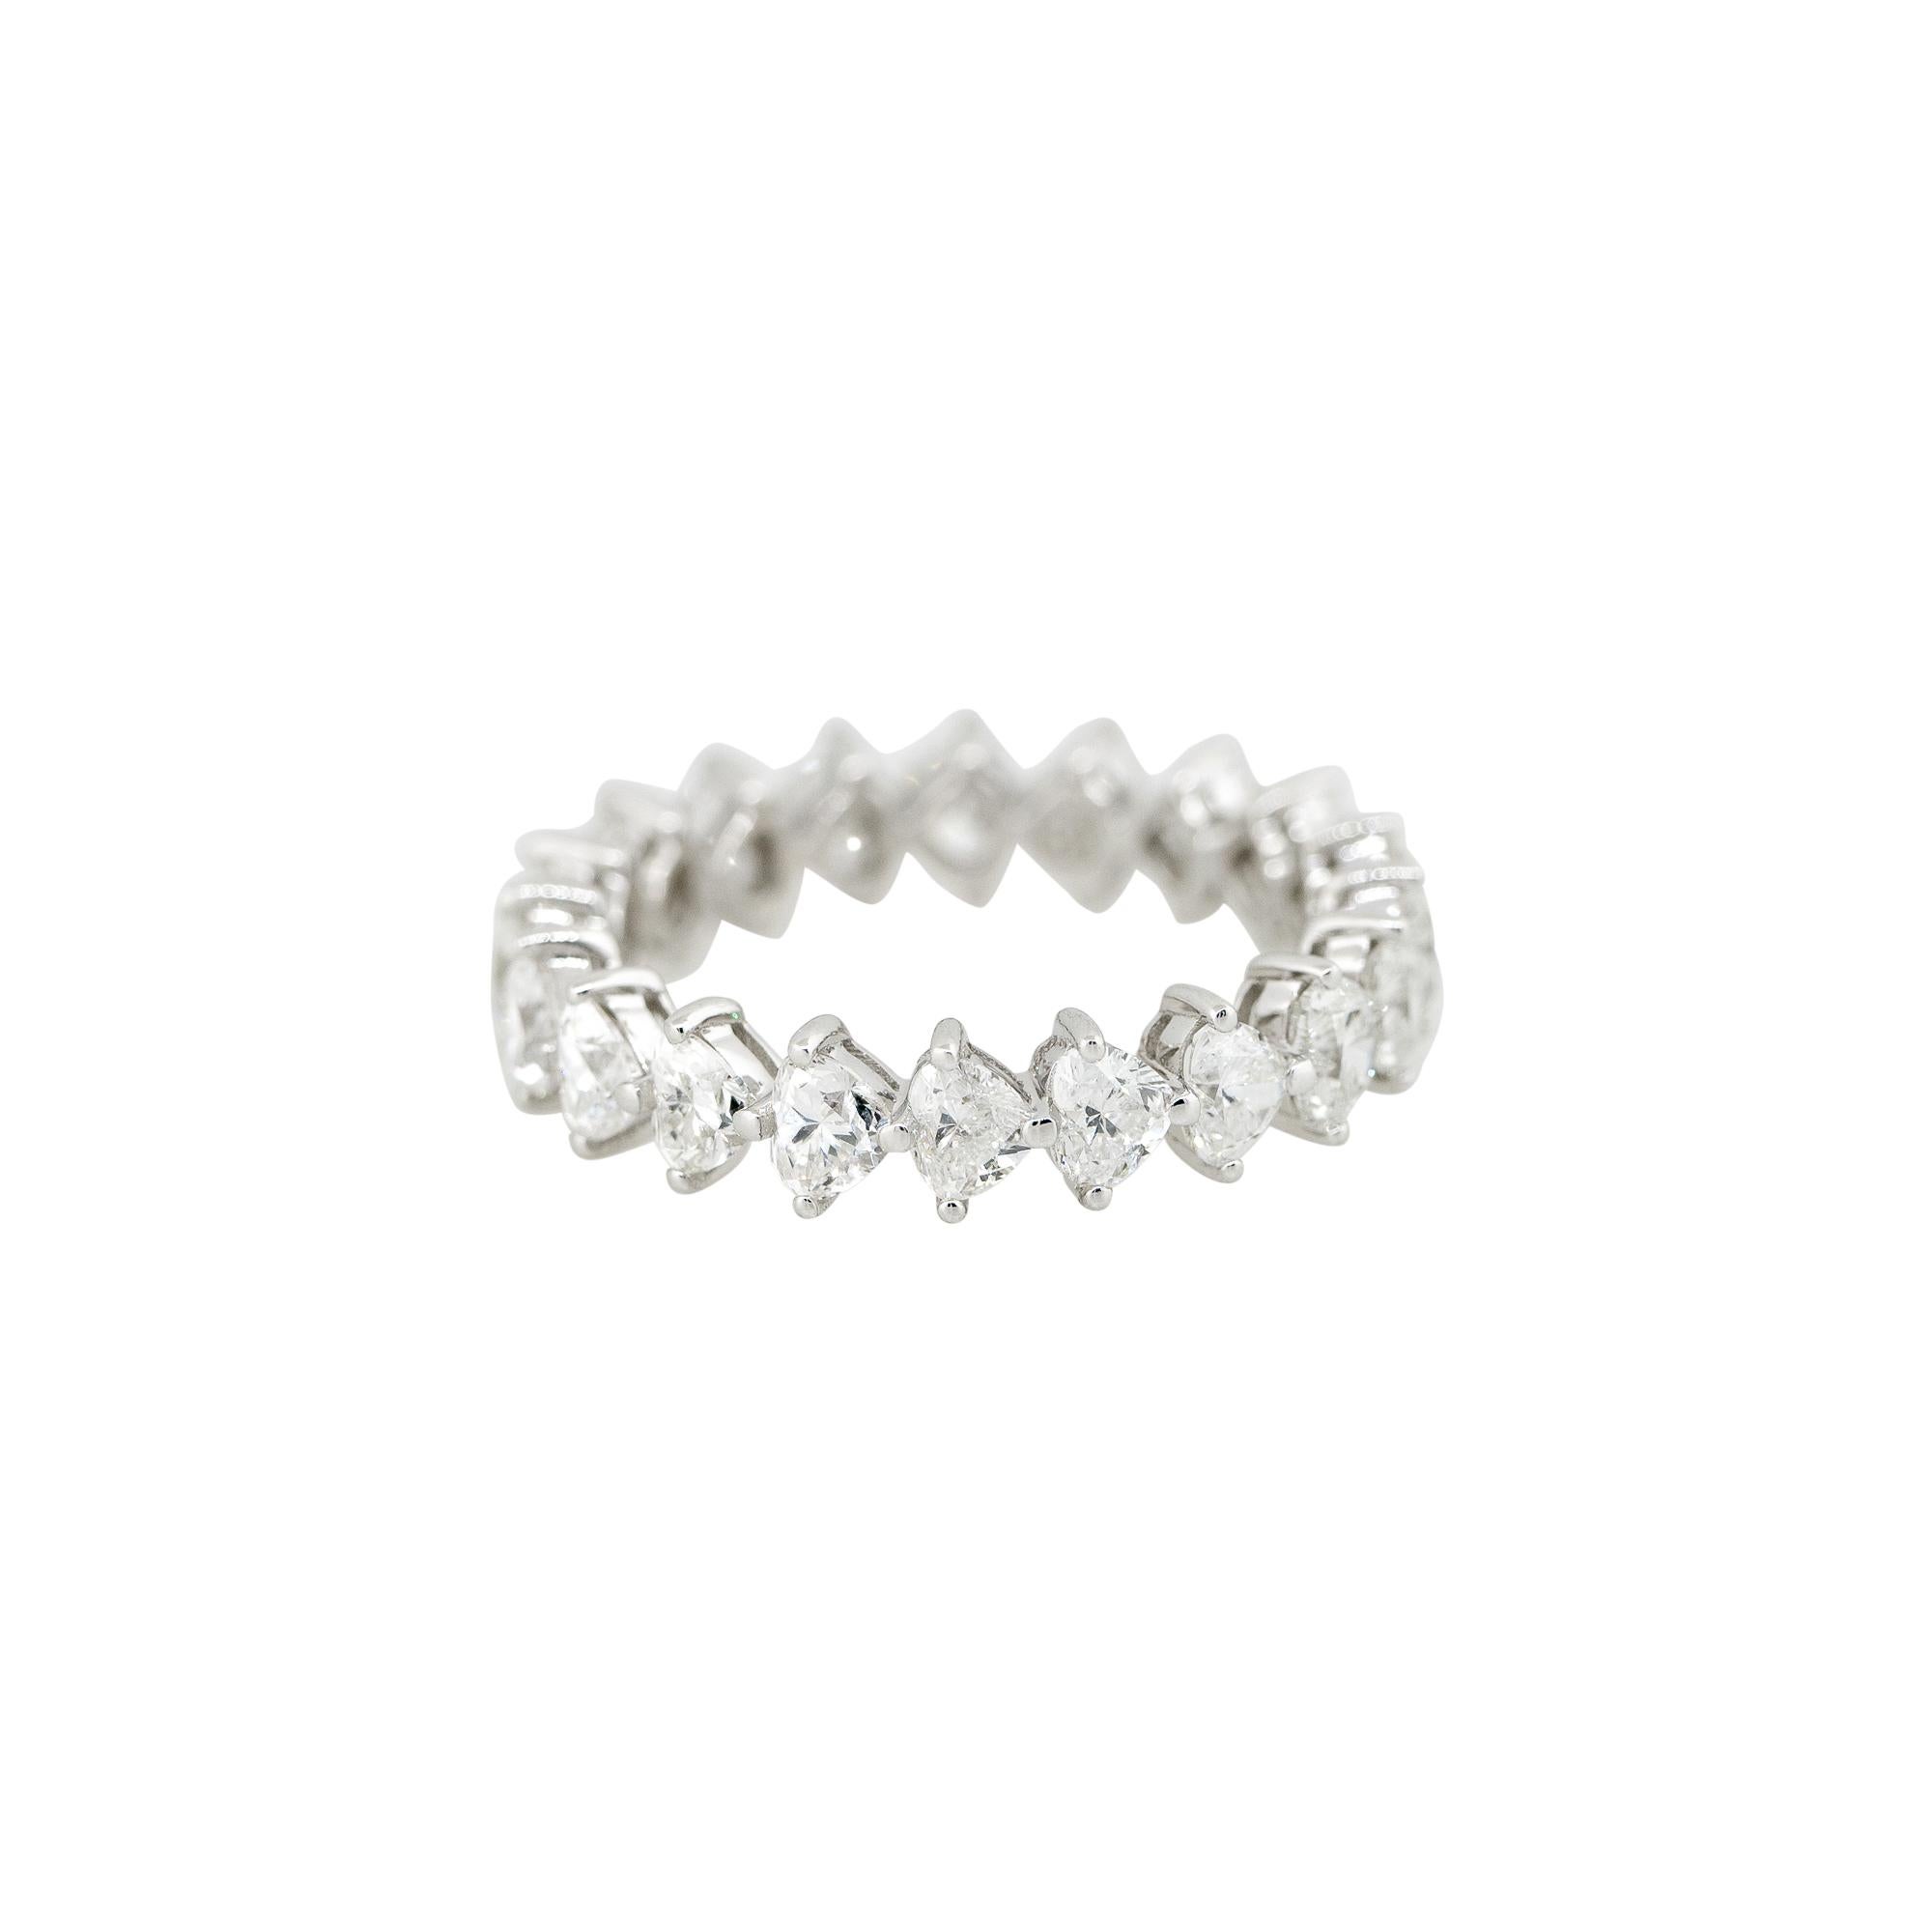 18k White Gold 2.86ctw Heart Shaped Diamond Eternity Band
Style: Women's Diamond Eternity Band
Material: 18k White Gold
Main Diamond Details: Approximately 2.86ctw of Heart Shaped Diamonds. There are 20 stones total. Diamonds are approximately F/G